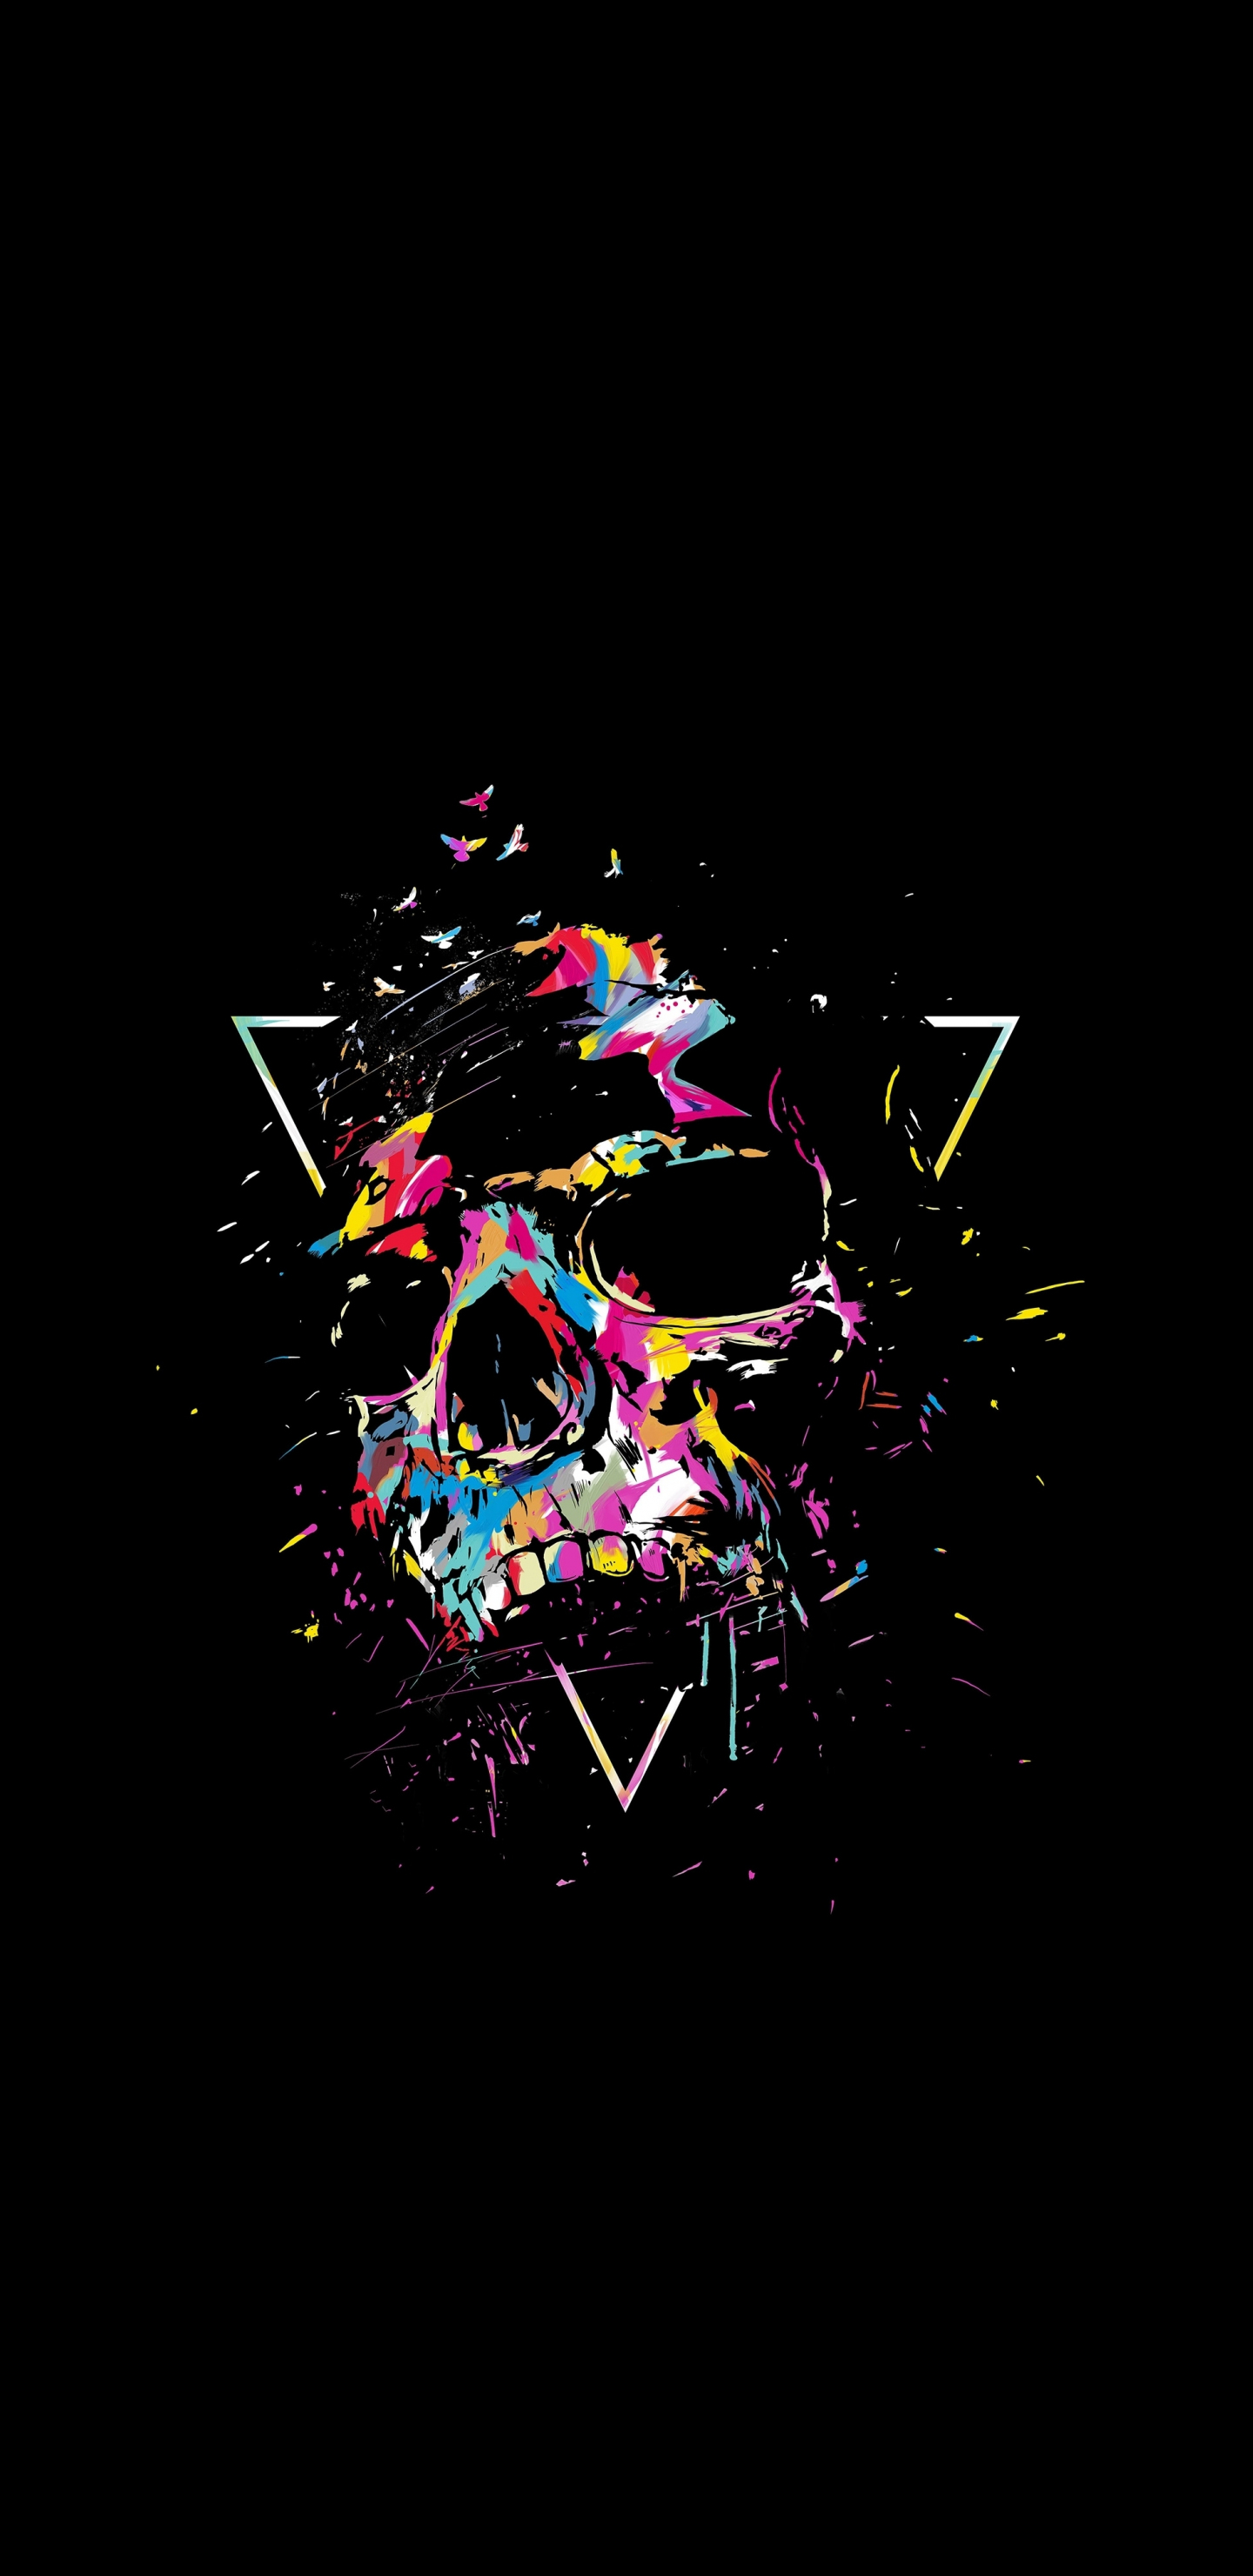 Skull Phone Wallpapers - 3D, Animated, Free Downloads